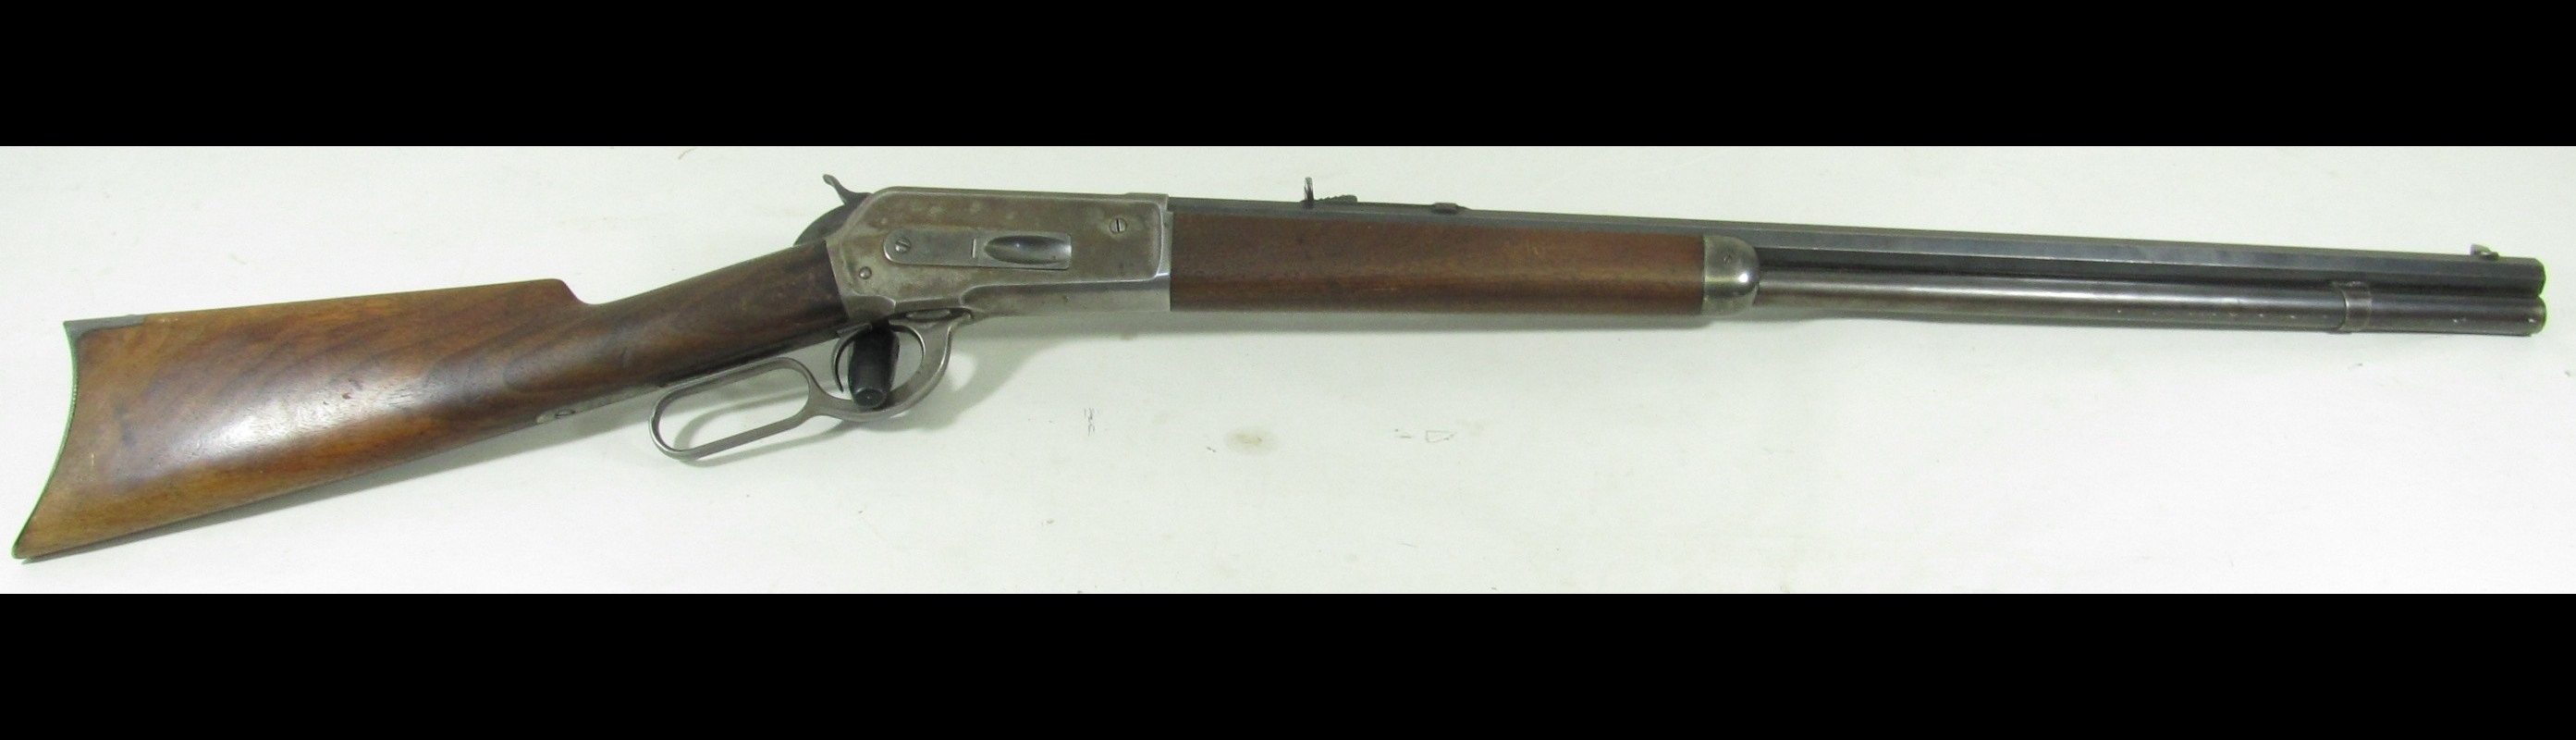 Weapons Winchester Model 1886 HD Wallpaper | Background Image